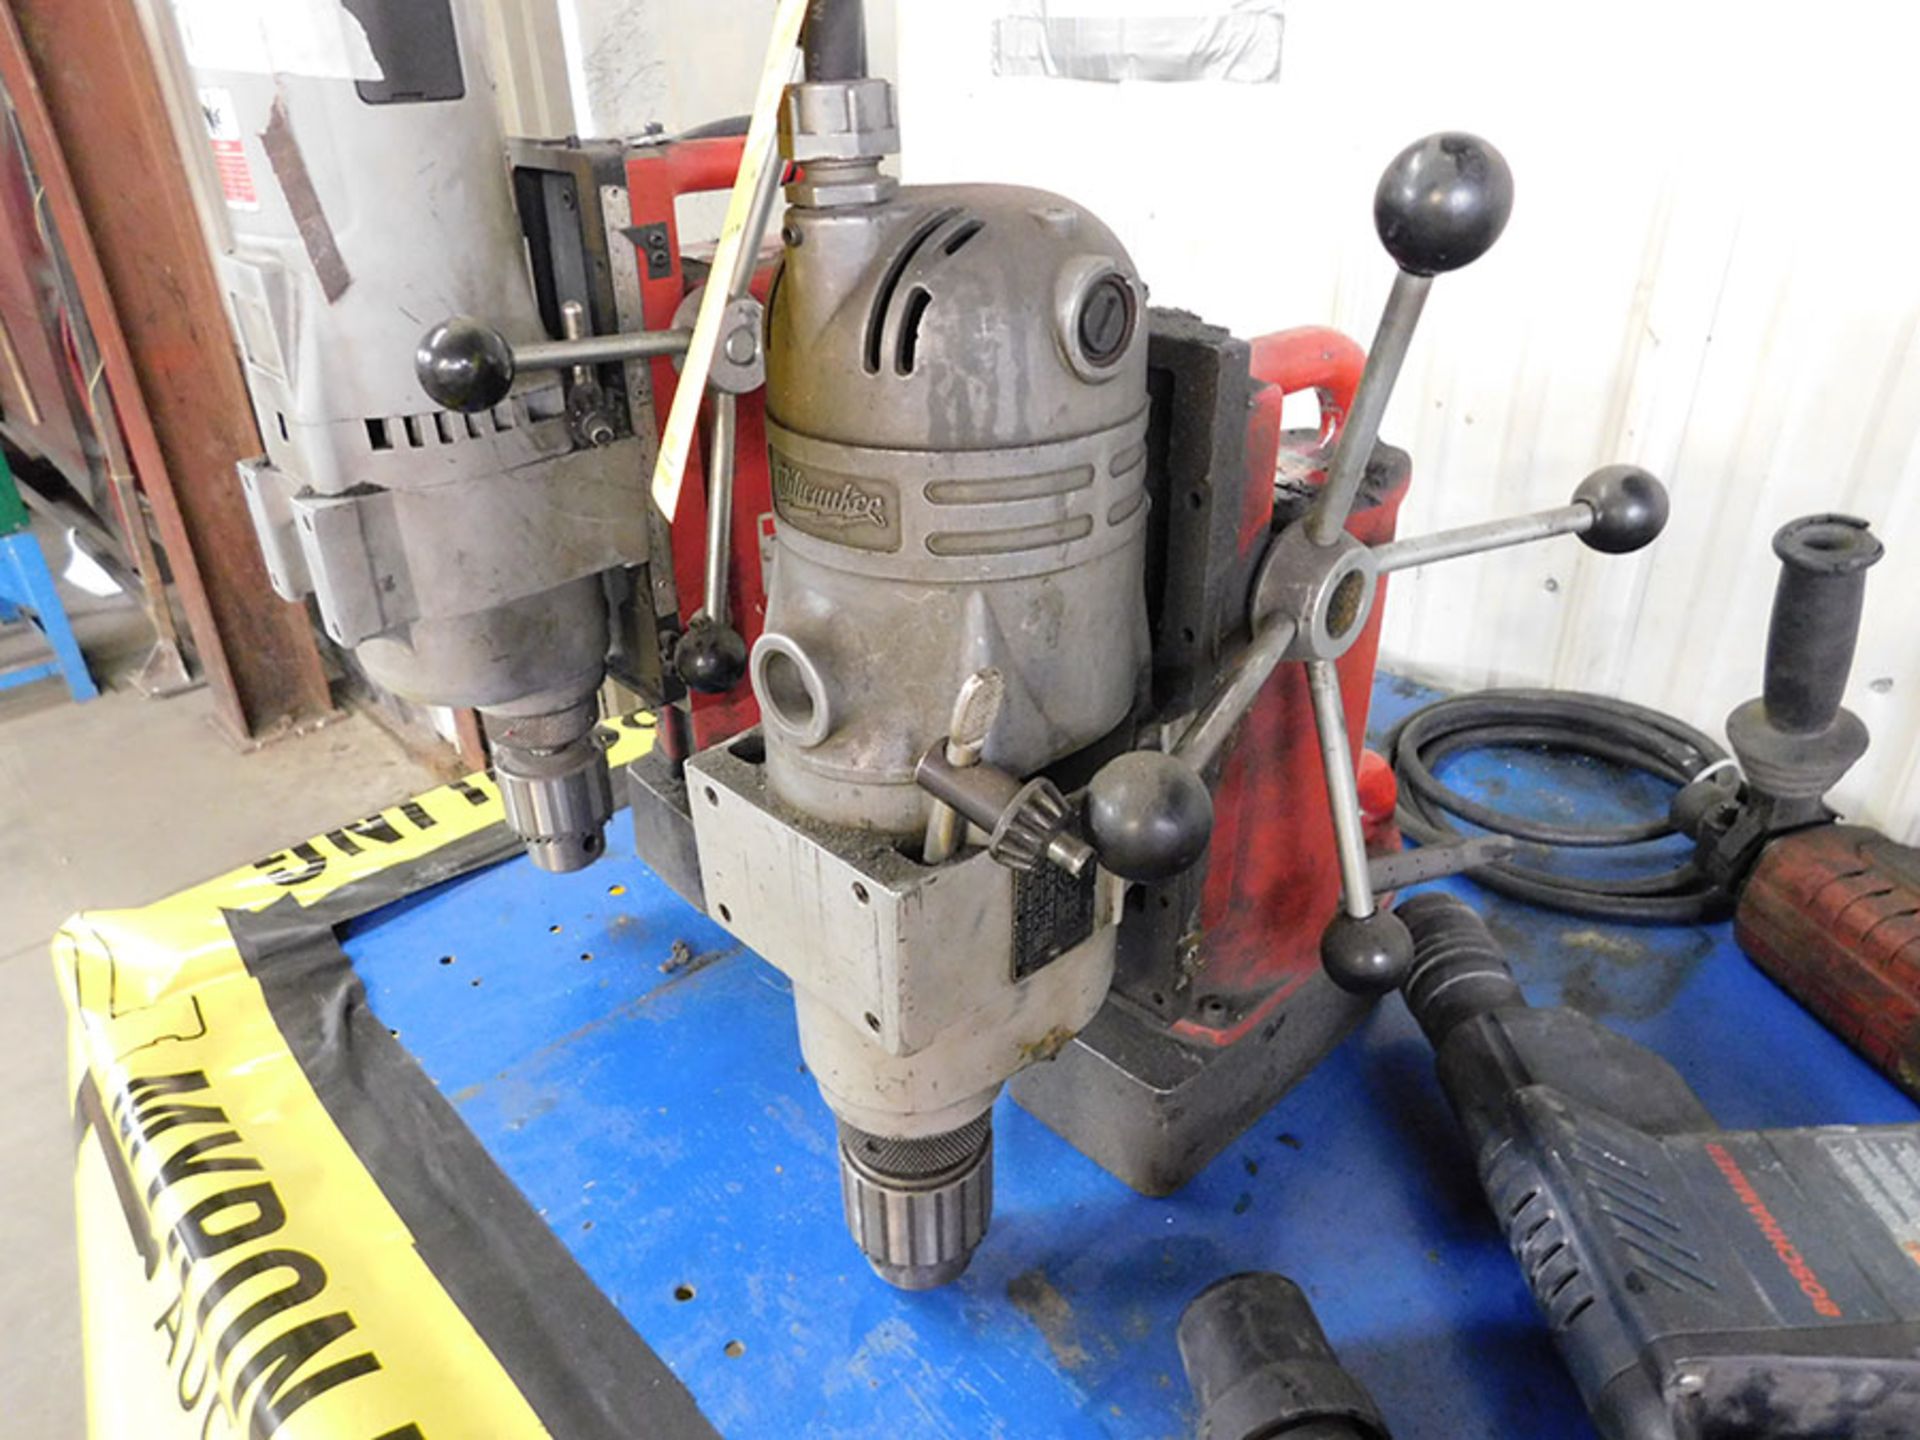 MILWAUKEE MAGNETIC BASE DRILL PRESS